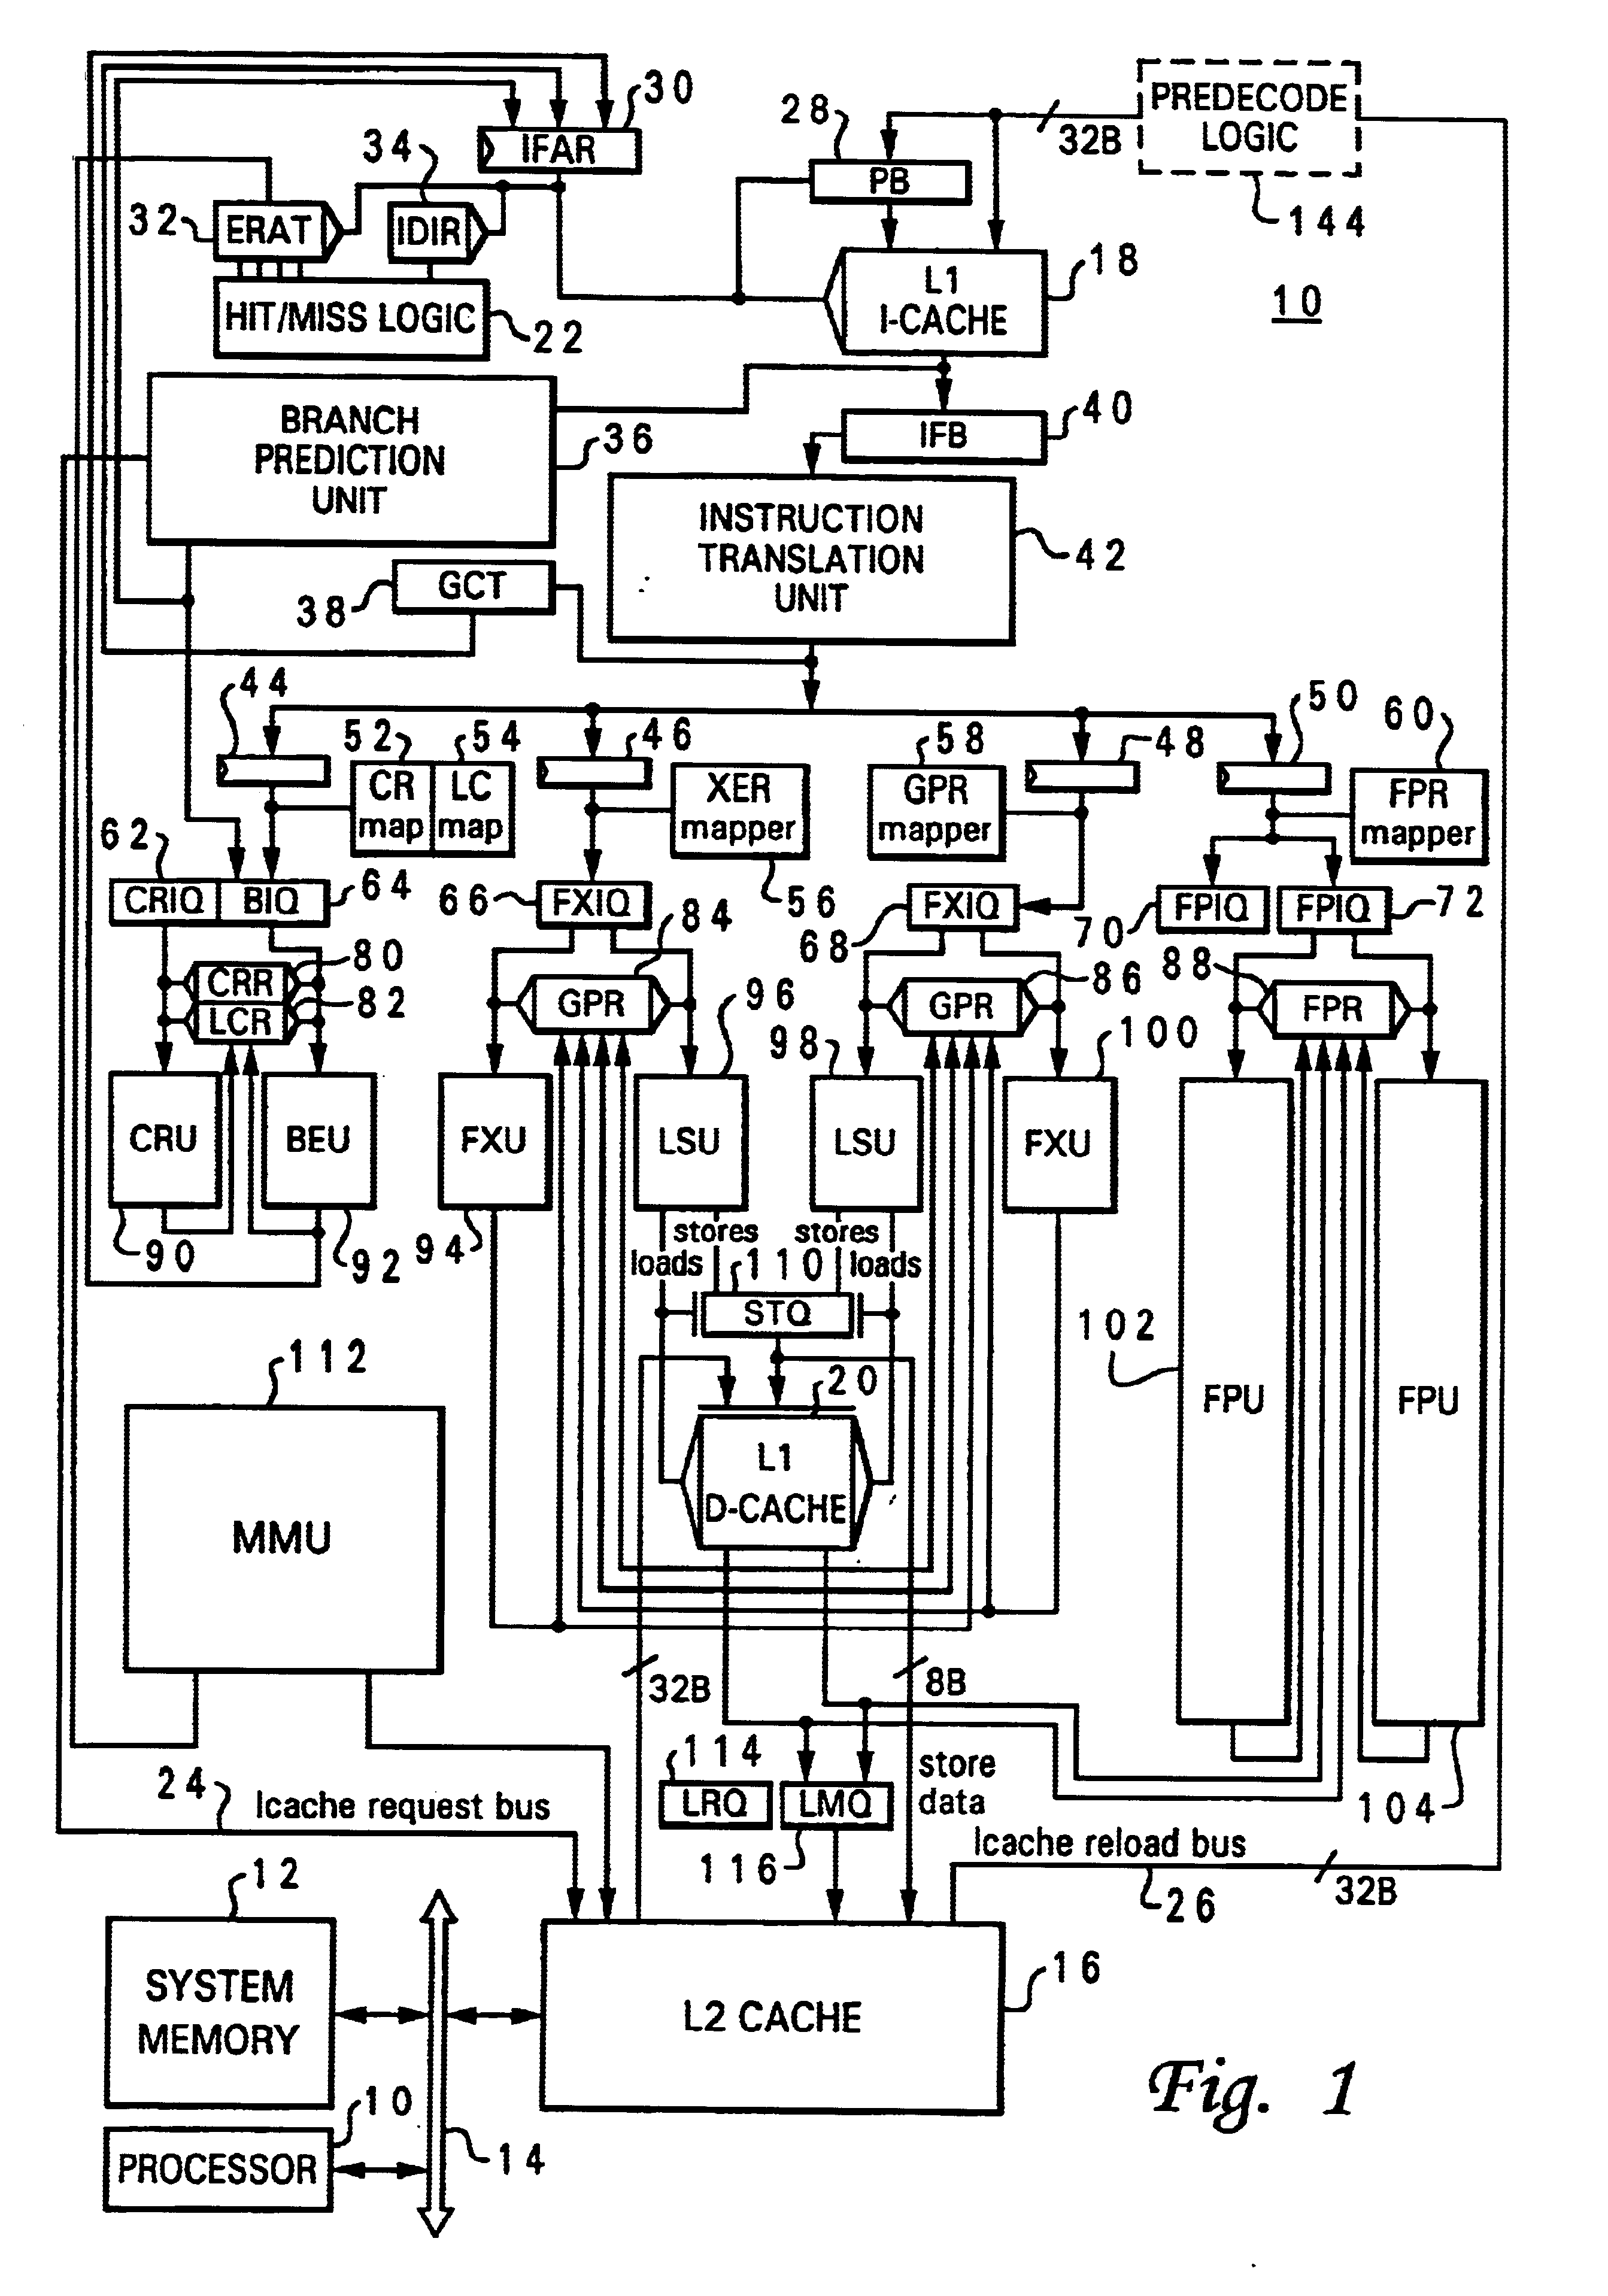 Processor and method for separately predicting conditional branches dependent on lock acquisition